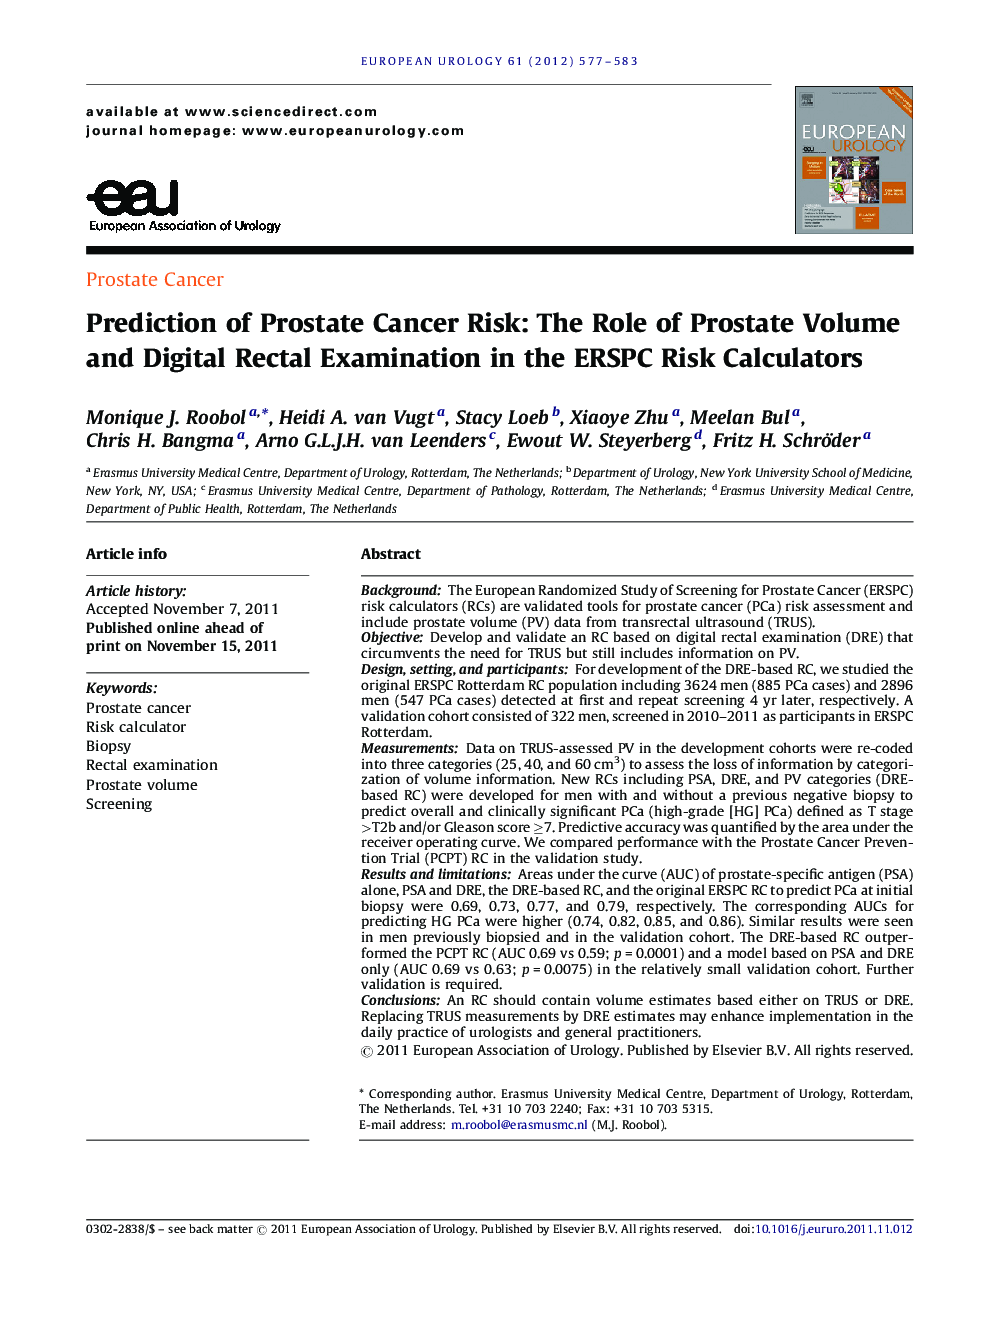 Prediction of Prostate Cancer Risk: The Role of Prostate Volume and Digital Rectal Examination in the ERSPC Risk Calculators